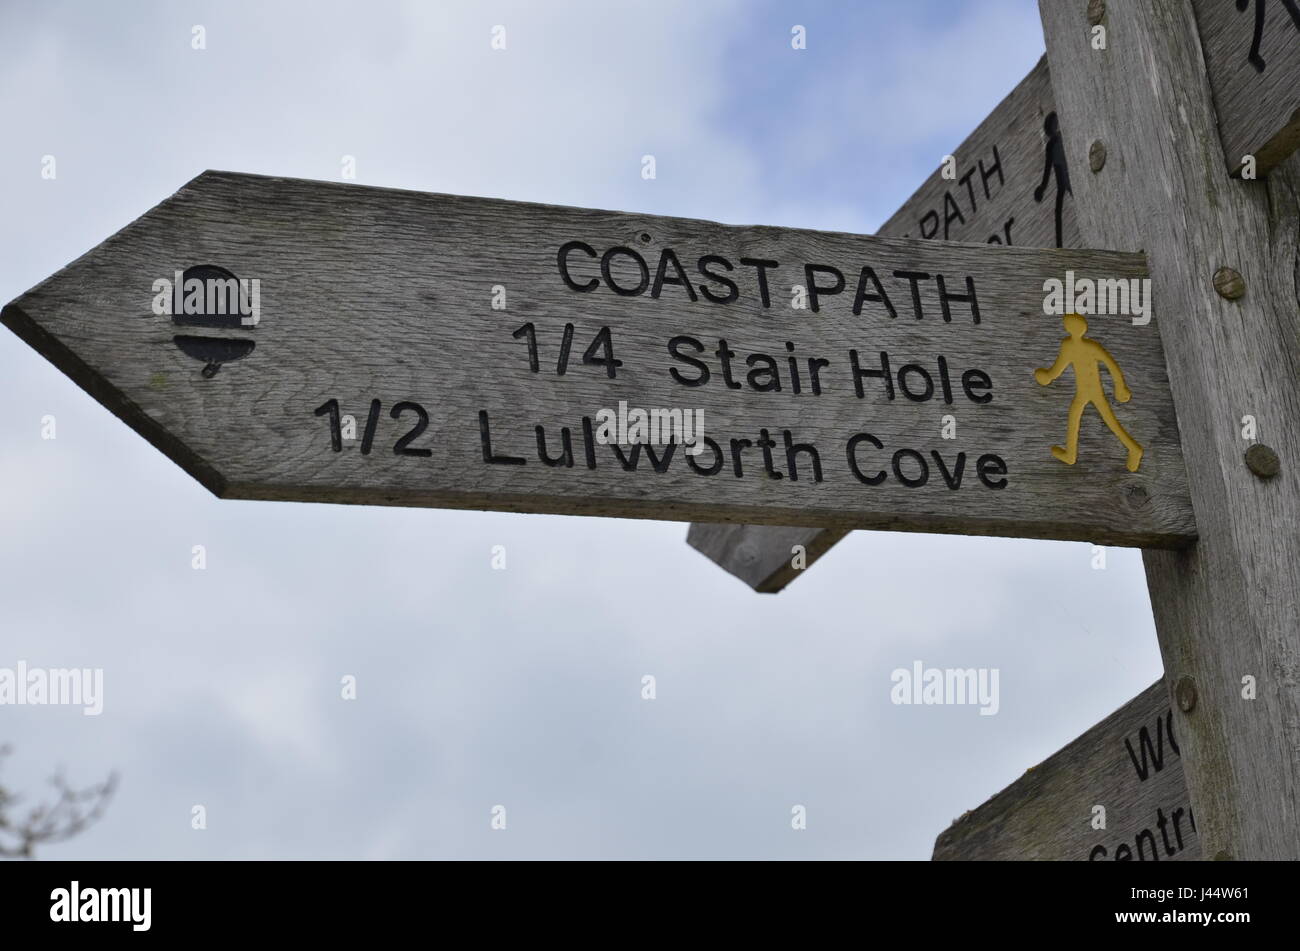 A footpath sign to Stair Hole and Lulworth Cove on the South West Coastal Path in West Lulworth, Dorset Stock Photo